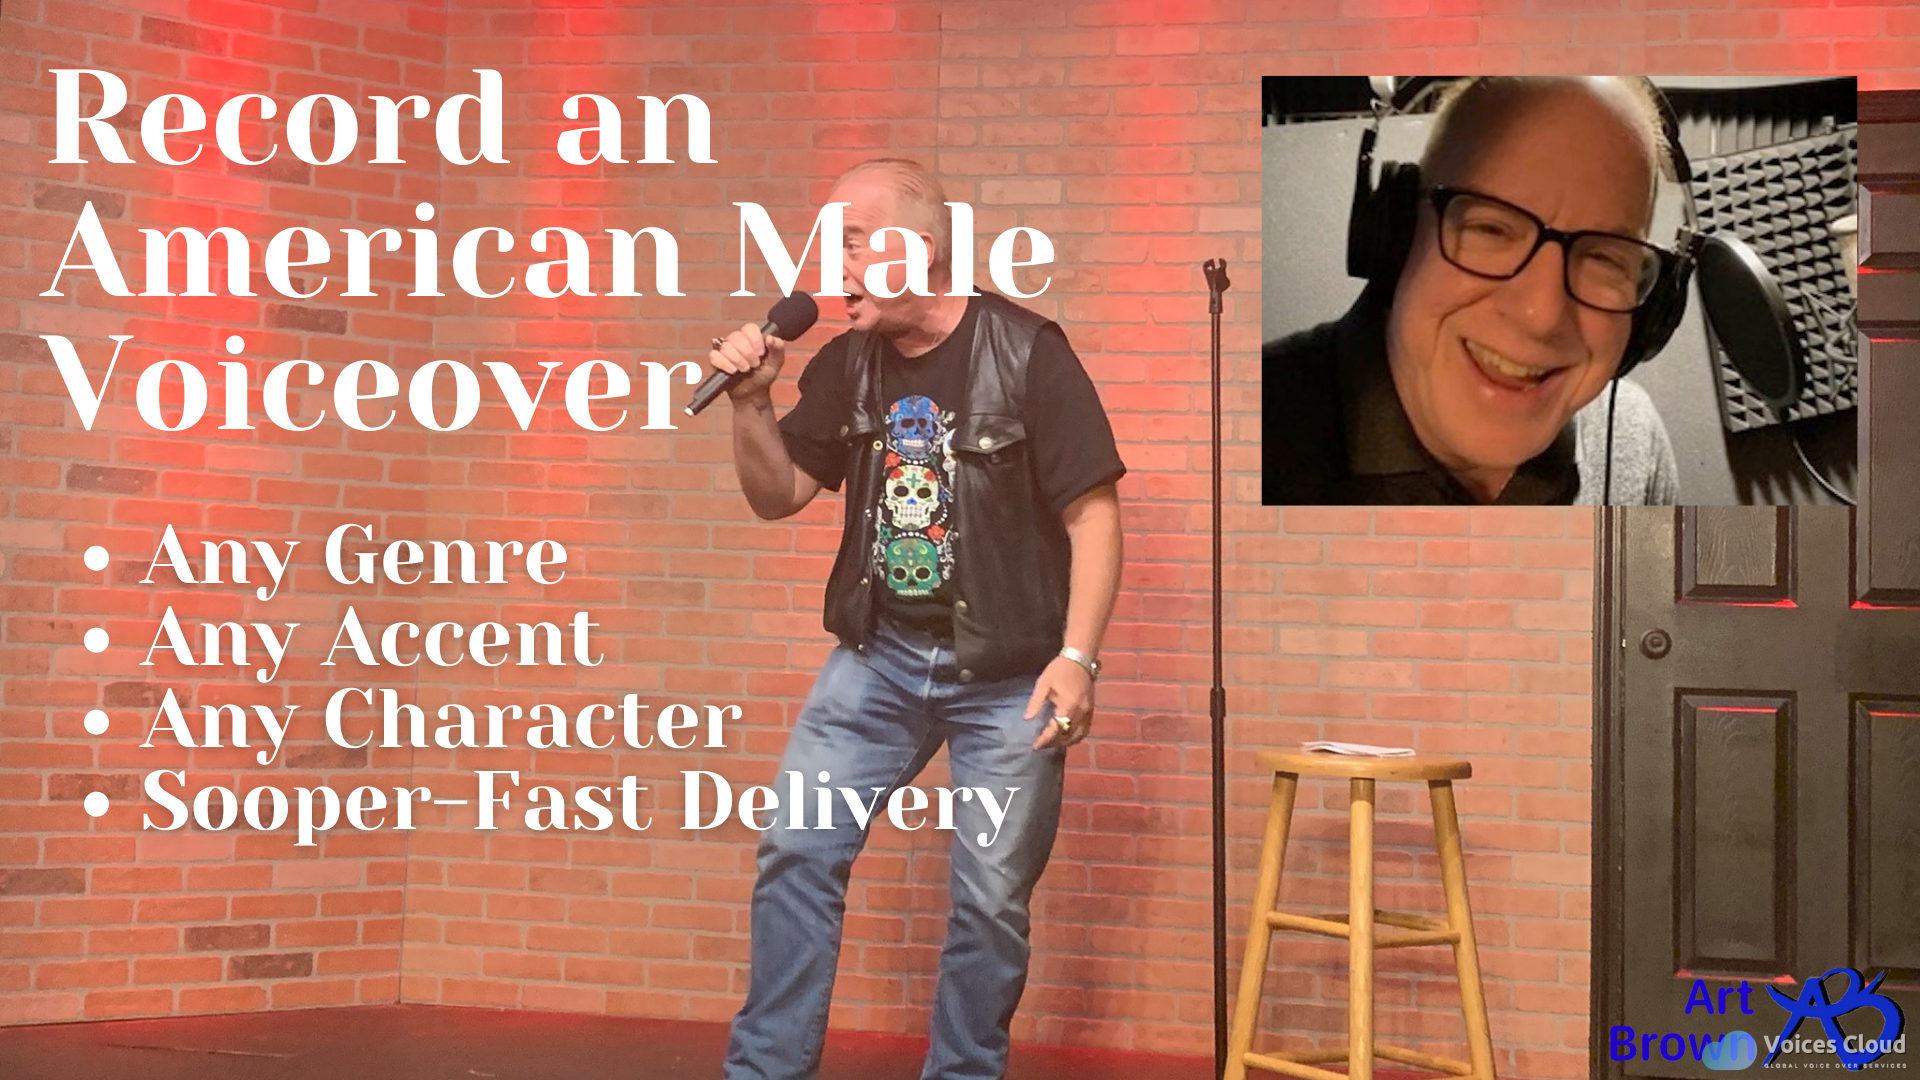 10360American Male Voiceover